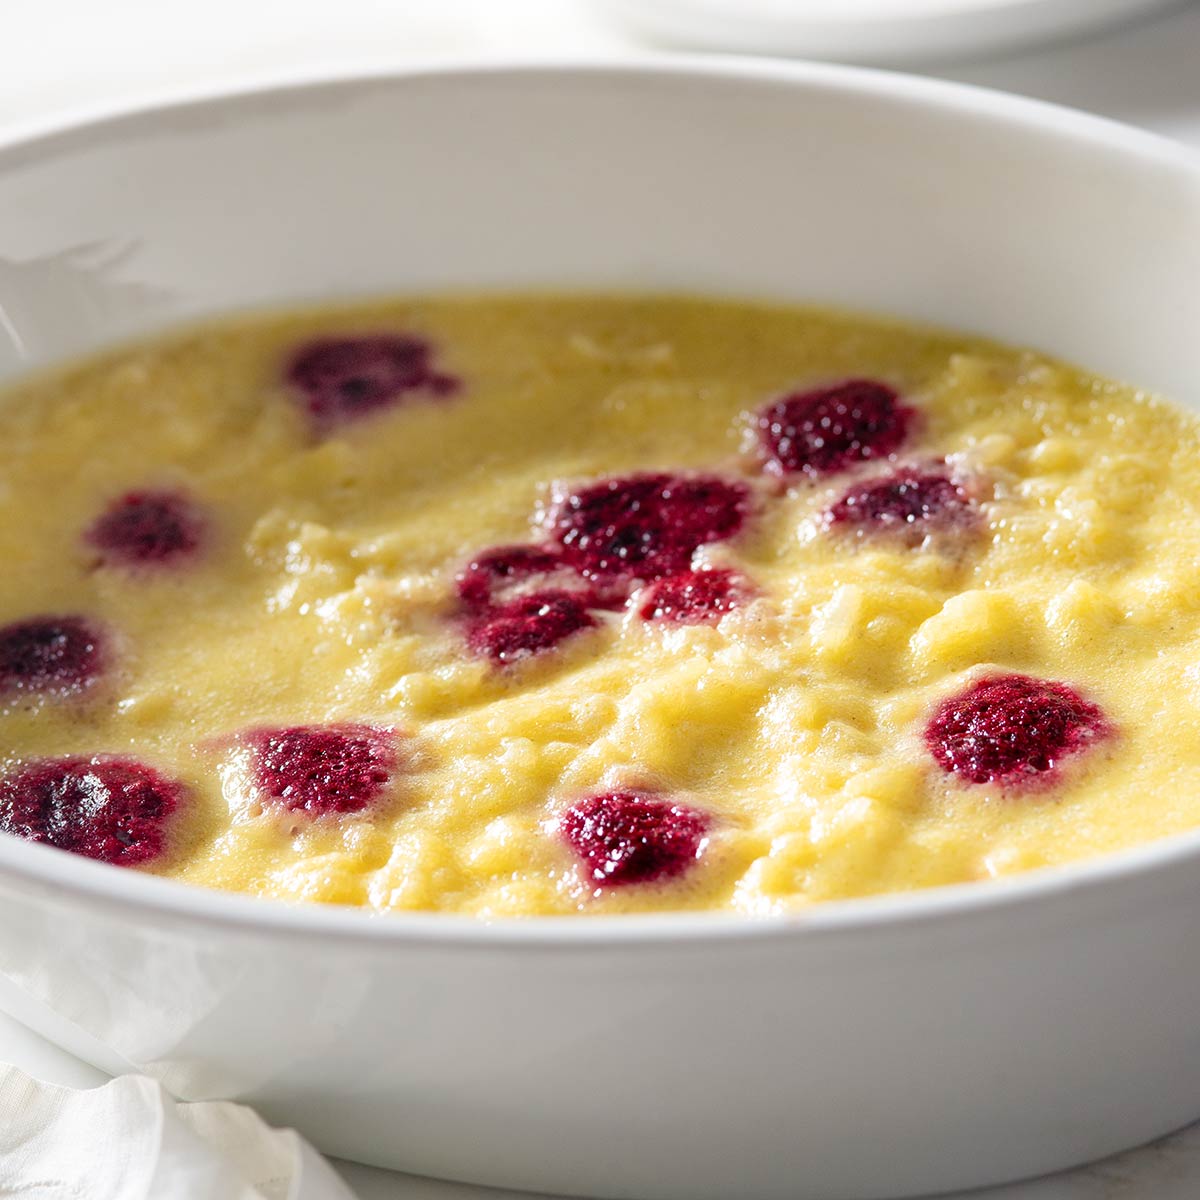 Baked custard rice pudding with raspberries in a baking dish.